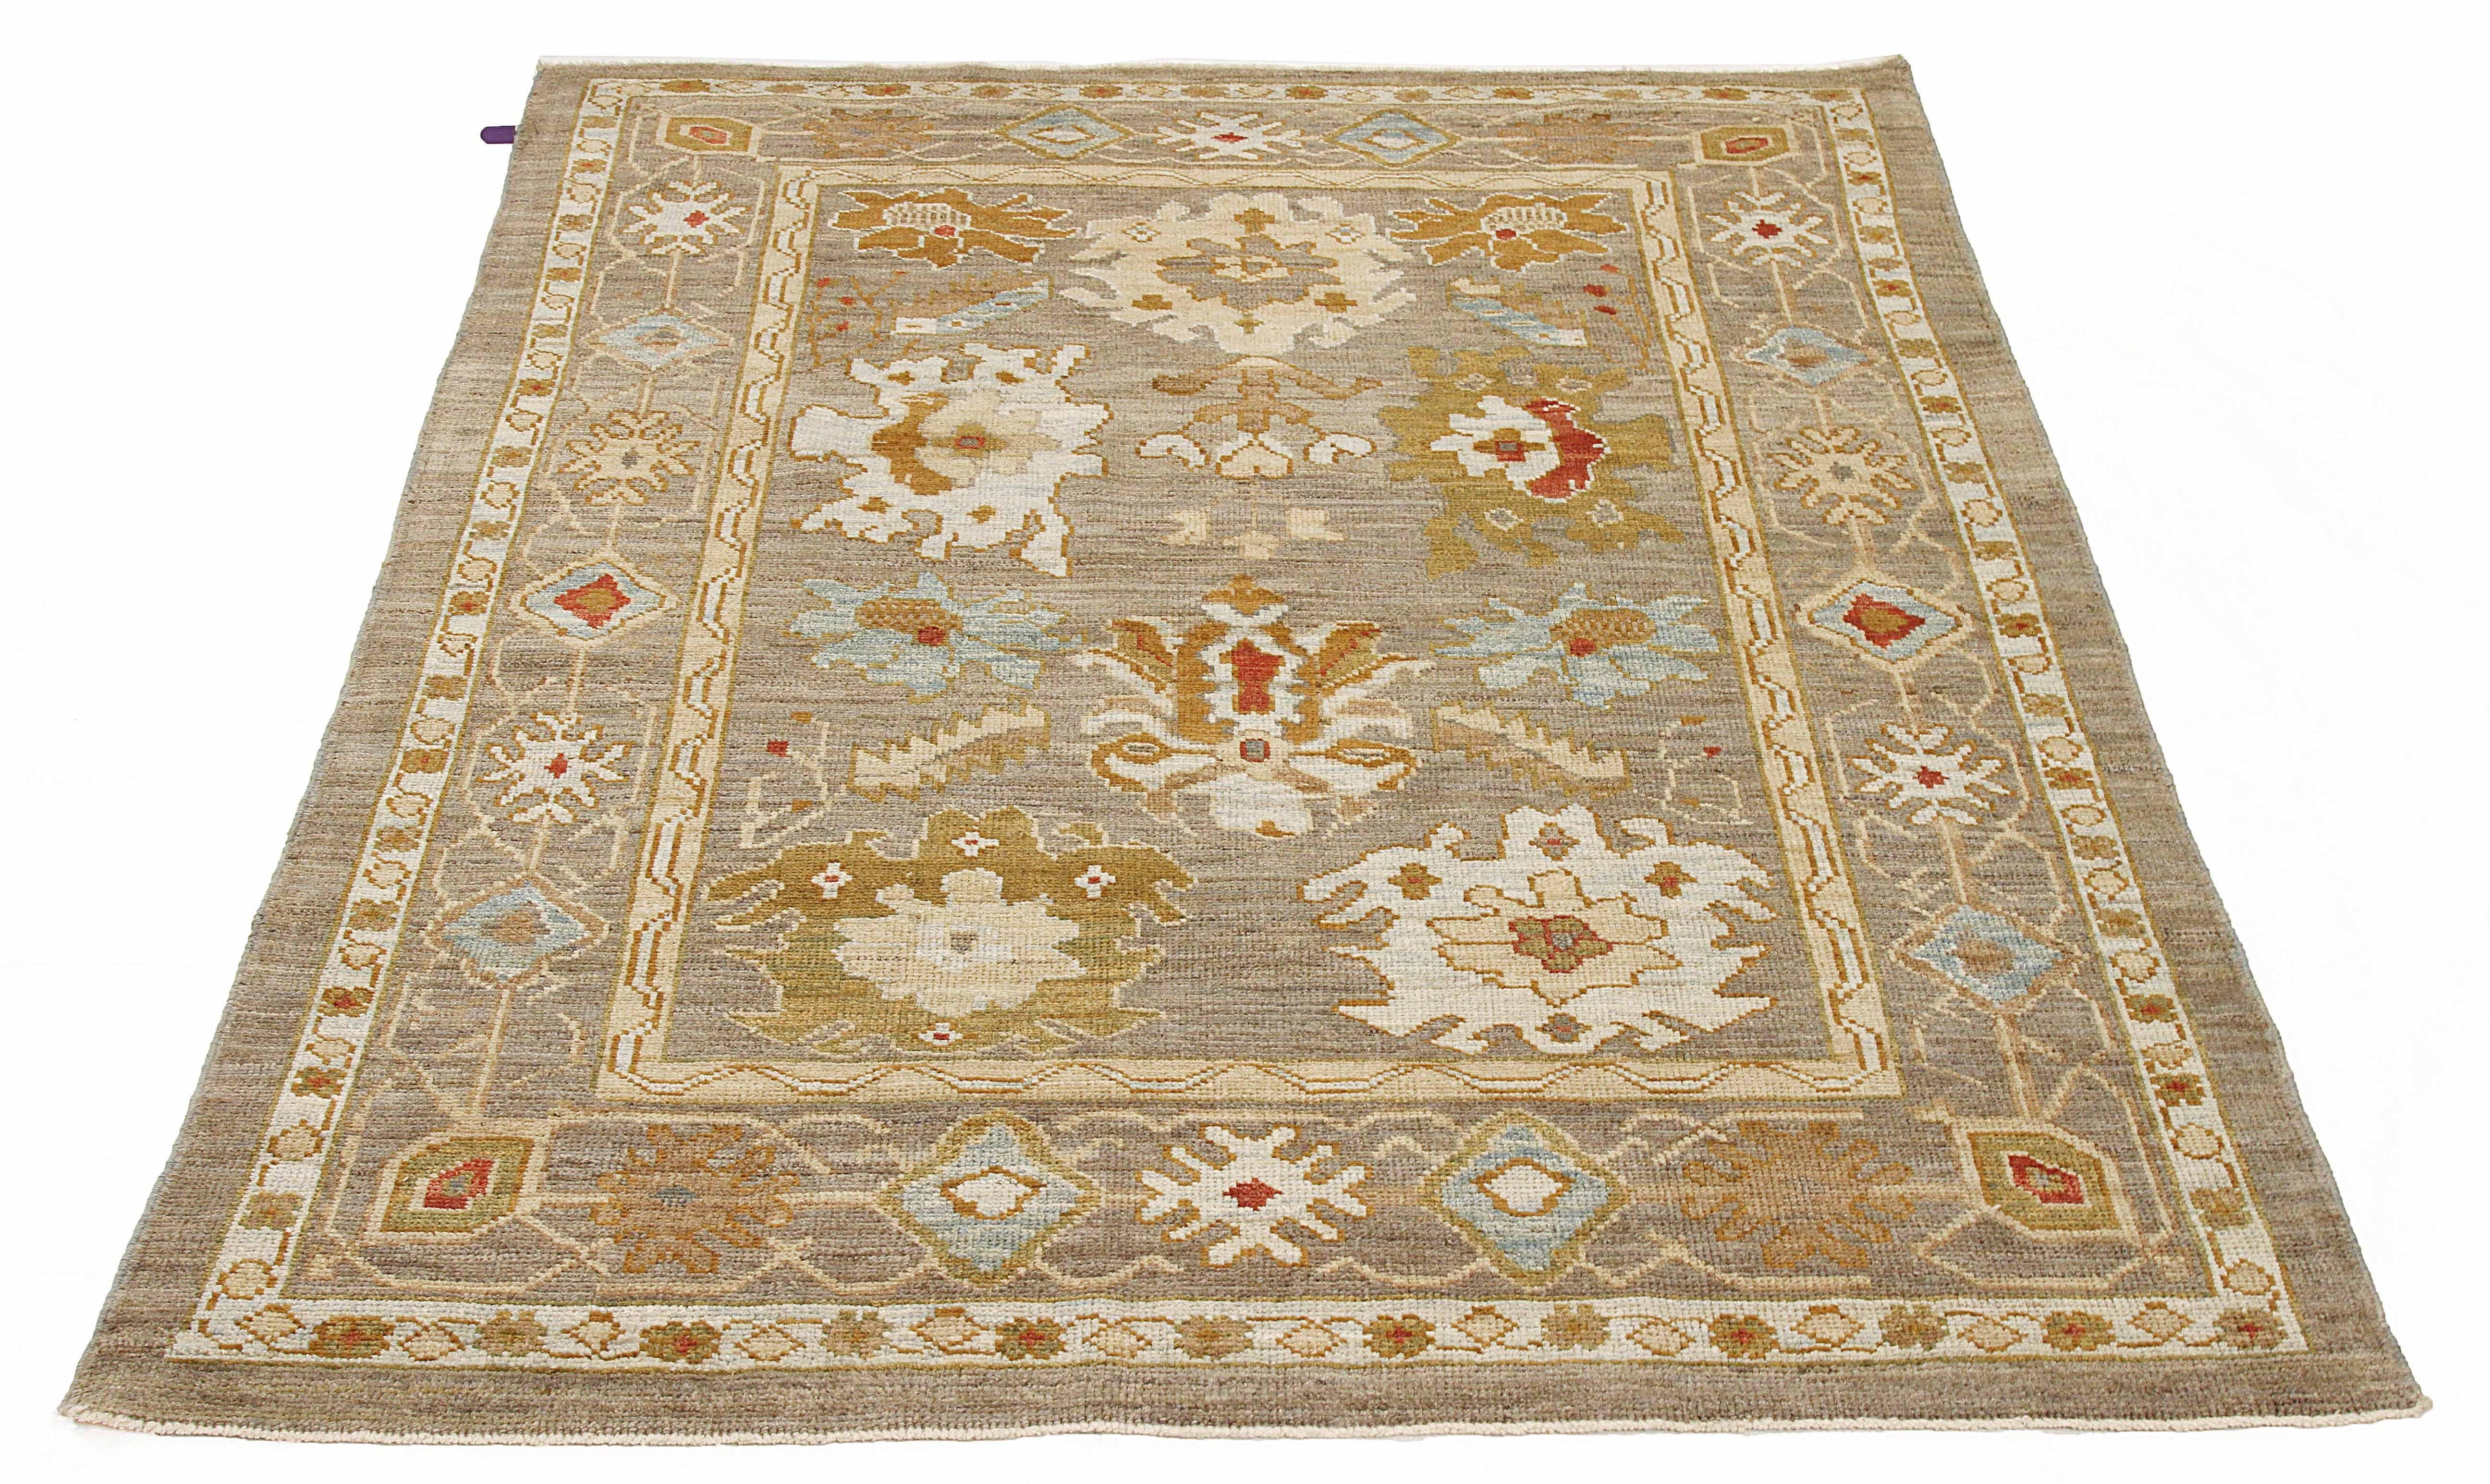 Contemporary Persian rug made of handwoven sheep’s wool of the finest quality. It’s colored with organic vegetable dyes that are certified safe for humans and pets alike. It features rows of flower medallion details allover associated with Oushak